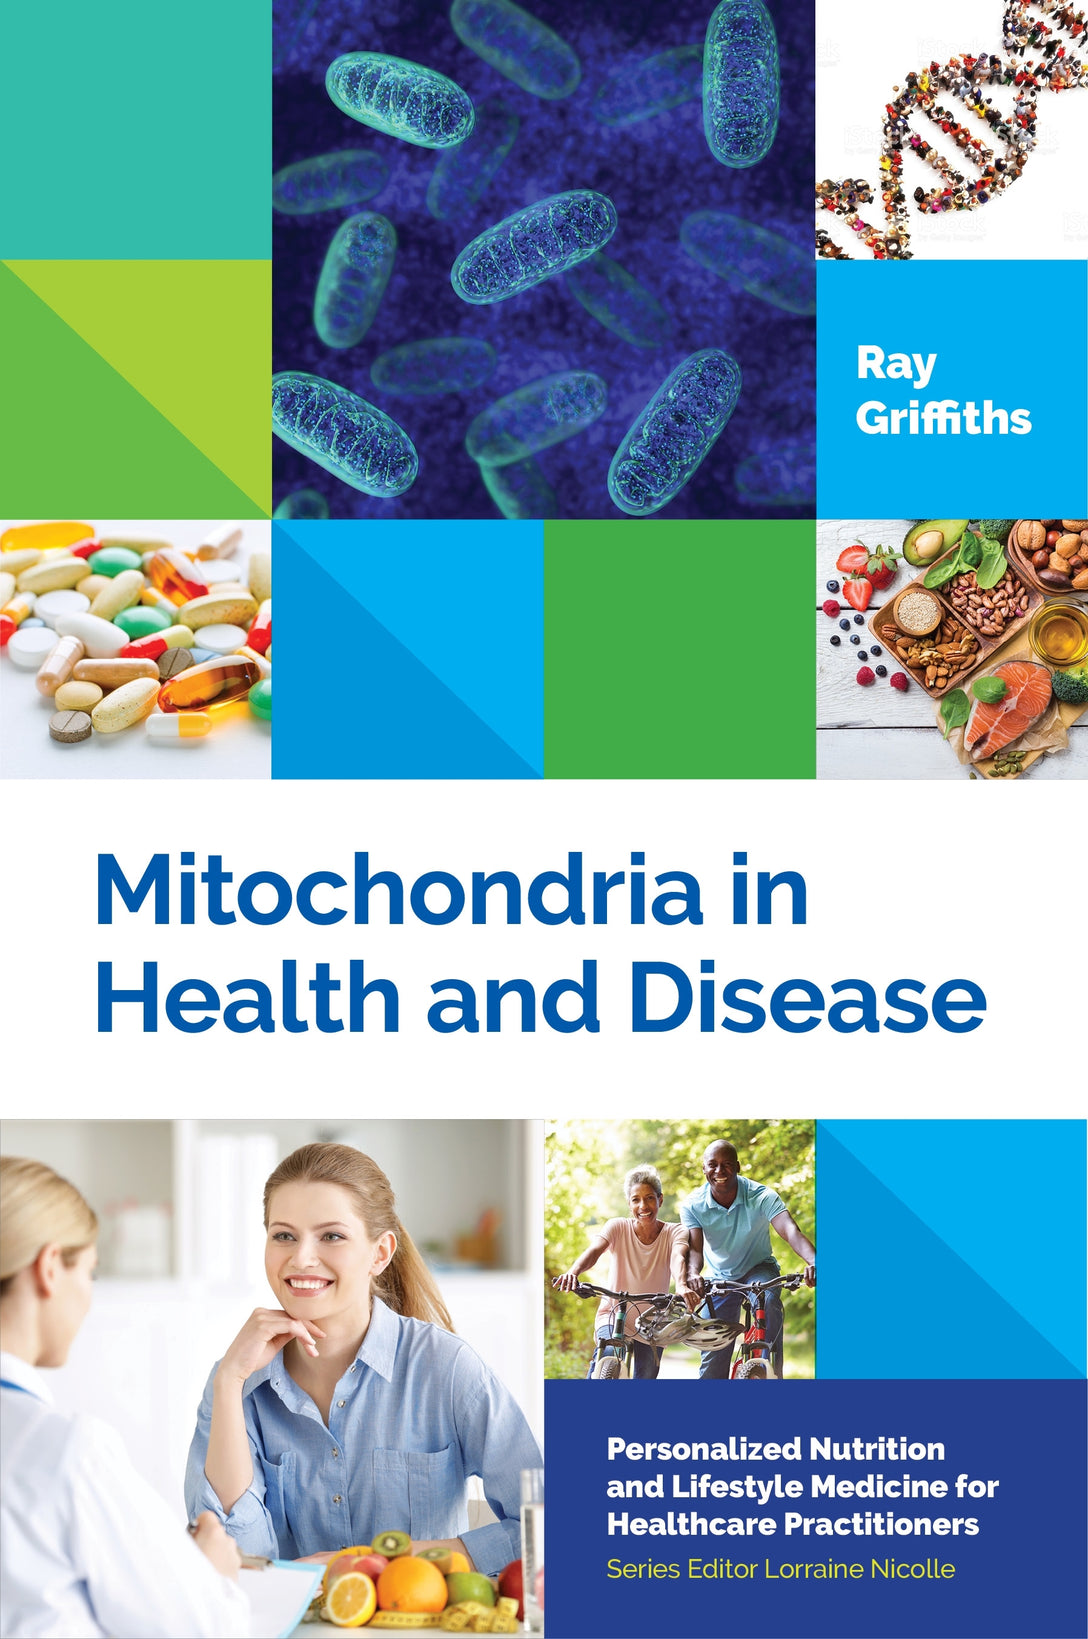 Mitochondria in Health and Disease by Ray Griffiths, Lorraine Nicolle, Lorraine Nicolle